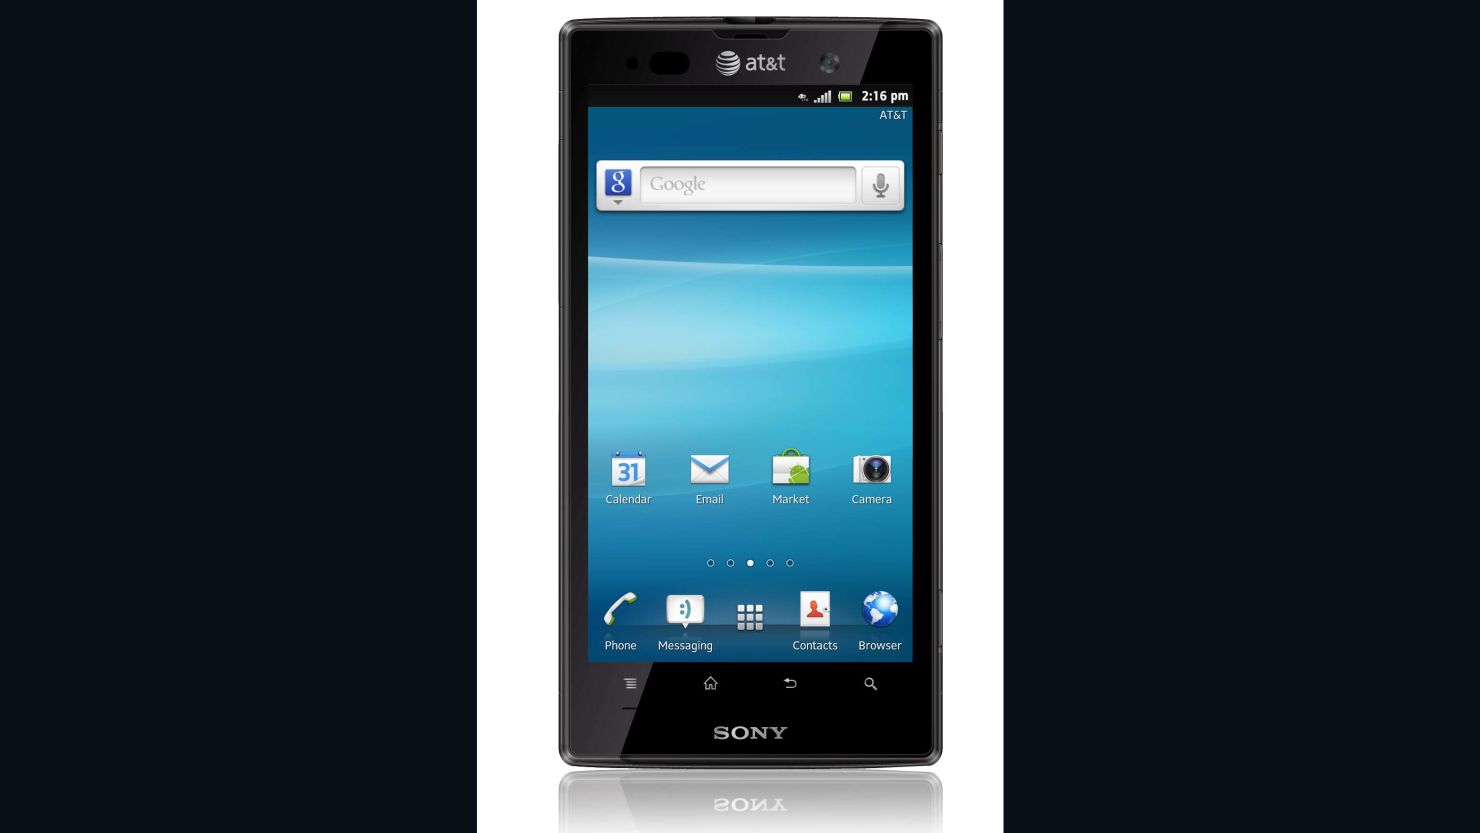 The Xperia Ion for AT&T will be the first Sony phone that doesn't carry the Ericsson name.